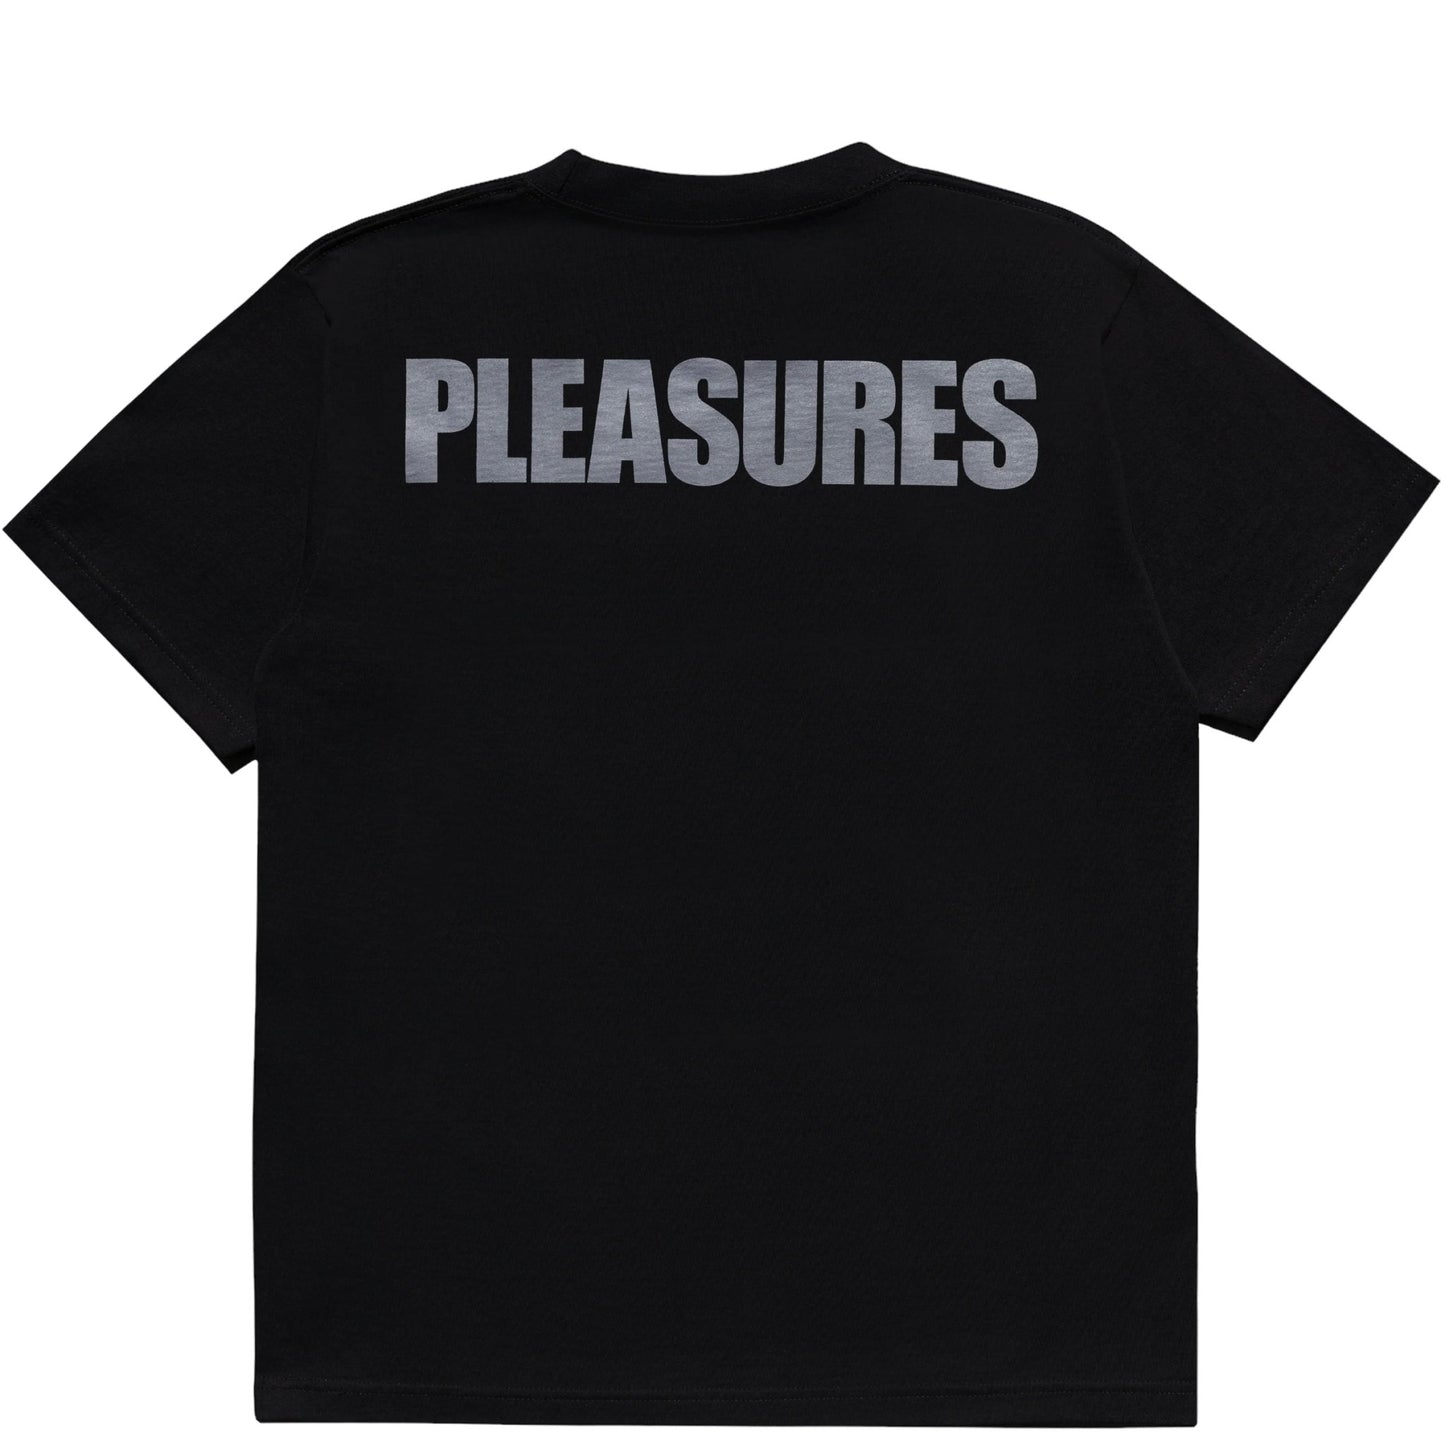 Black cotton PLEASURES BROKEN IN T-SHIRT BLK with the word "pleasures" screen printed in bold white letters on the back, part of an official collaboration with Joy Division.